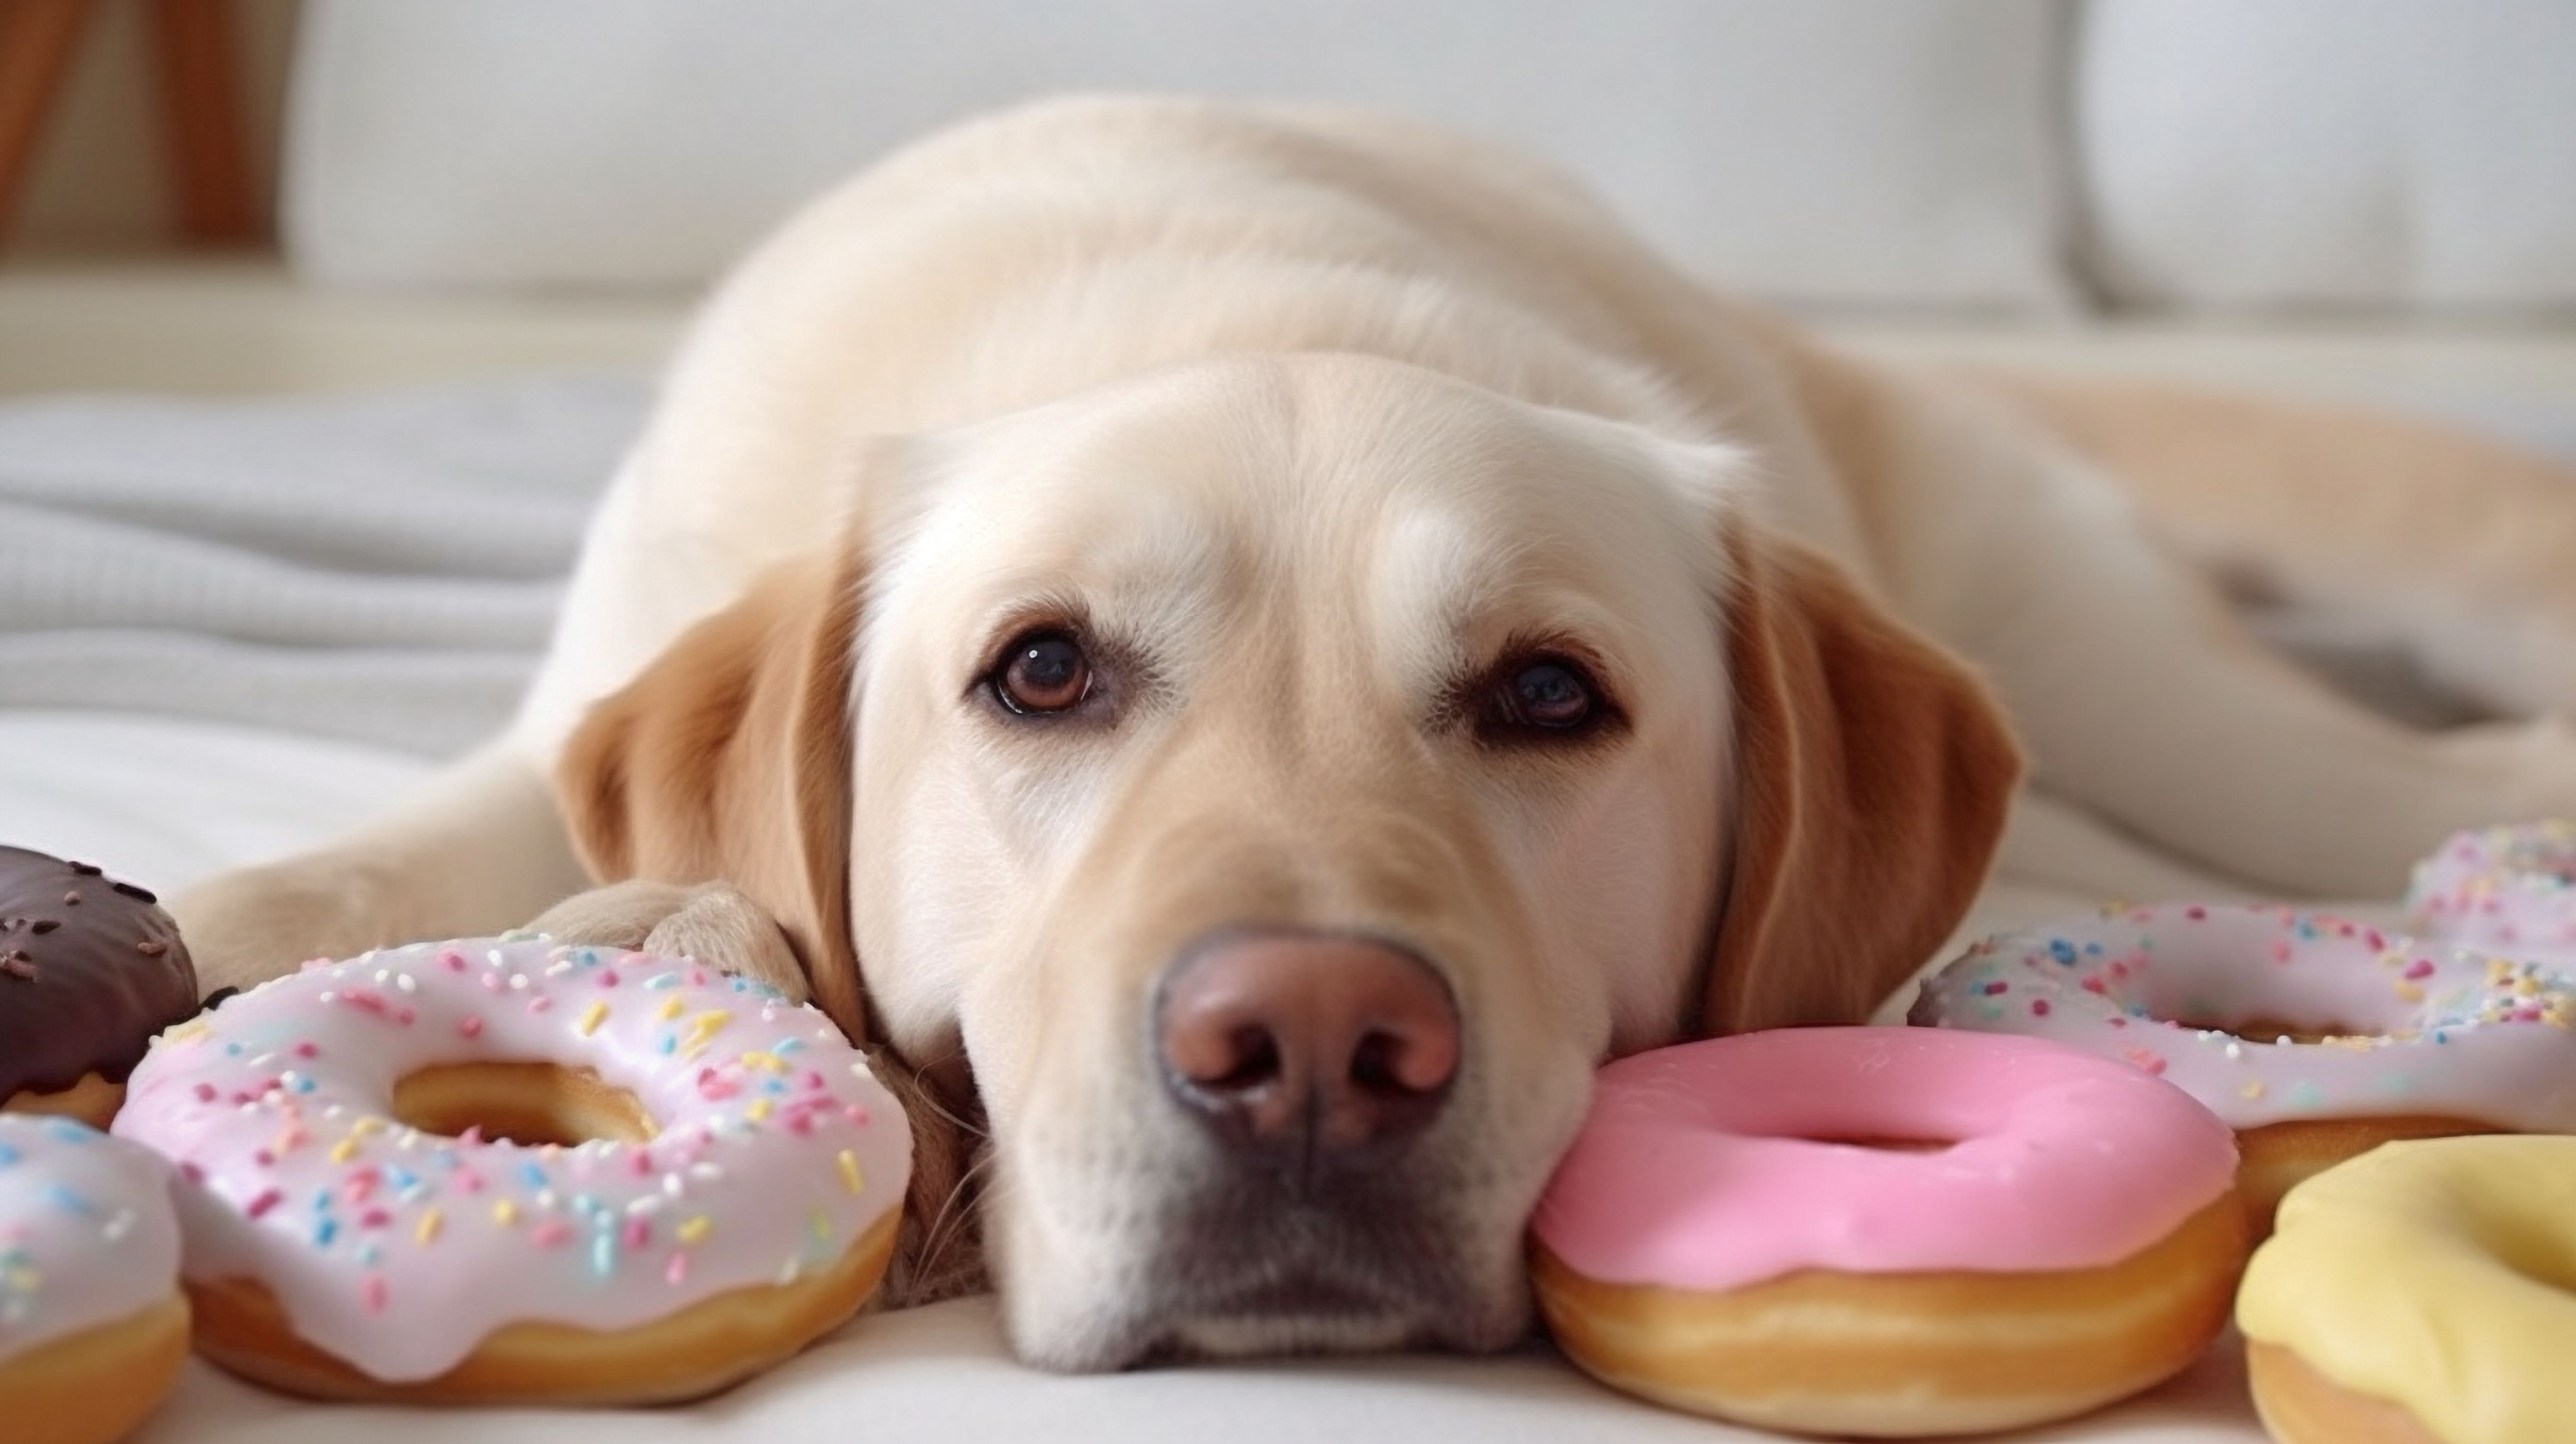 A lab laying down next to several donuts